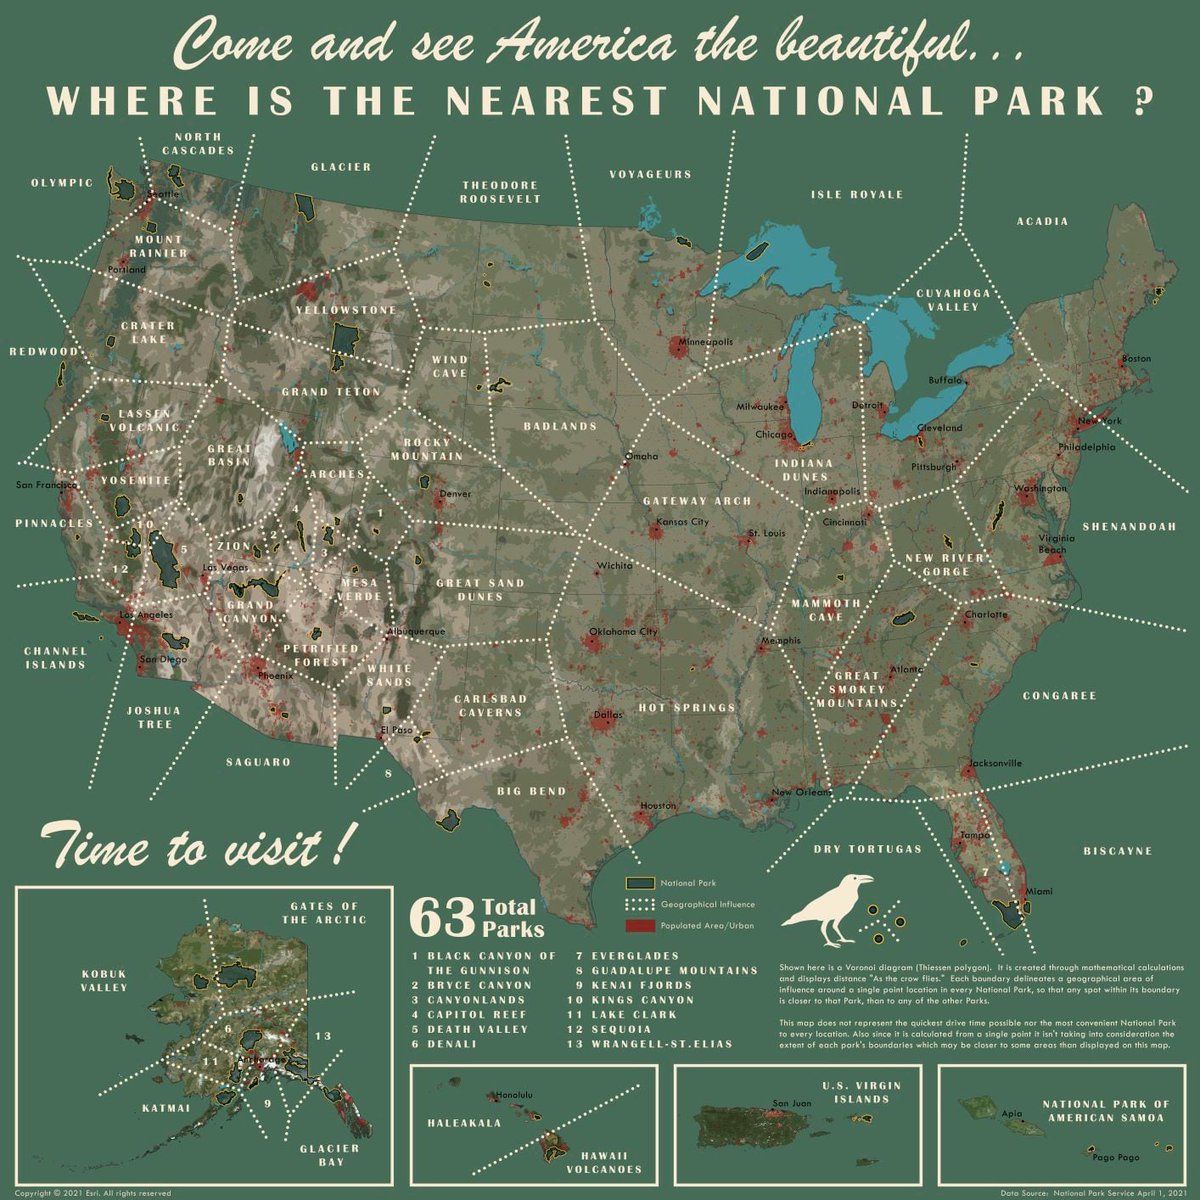 Grab your hiking boots 🥾 because April 20th is a @NatlParkService free entrance day! Find a park near you to explore the great outdoors. 🌲🌞 esri.social/JjJK50RjvVA 🗺️Created by @emilymeriam #NationalParkWeek